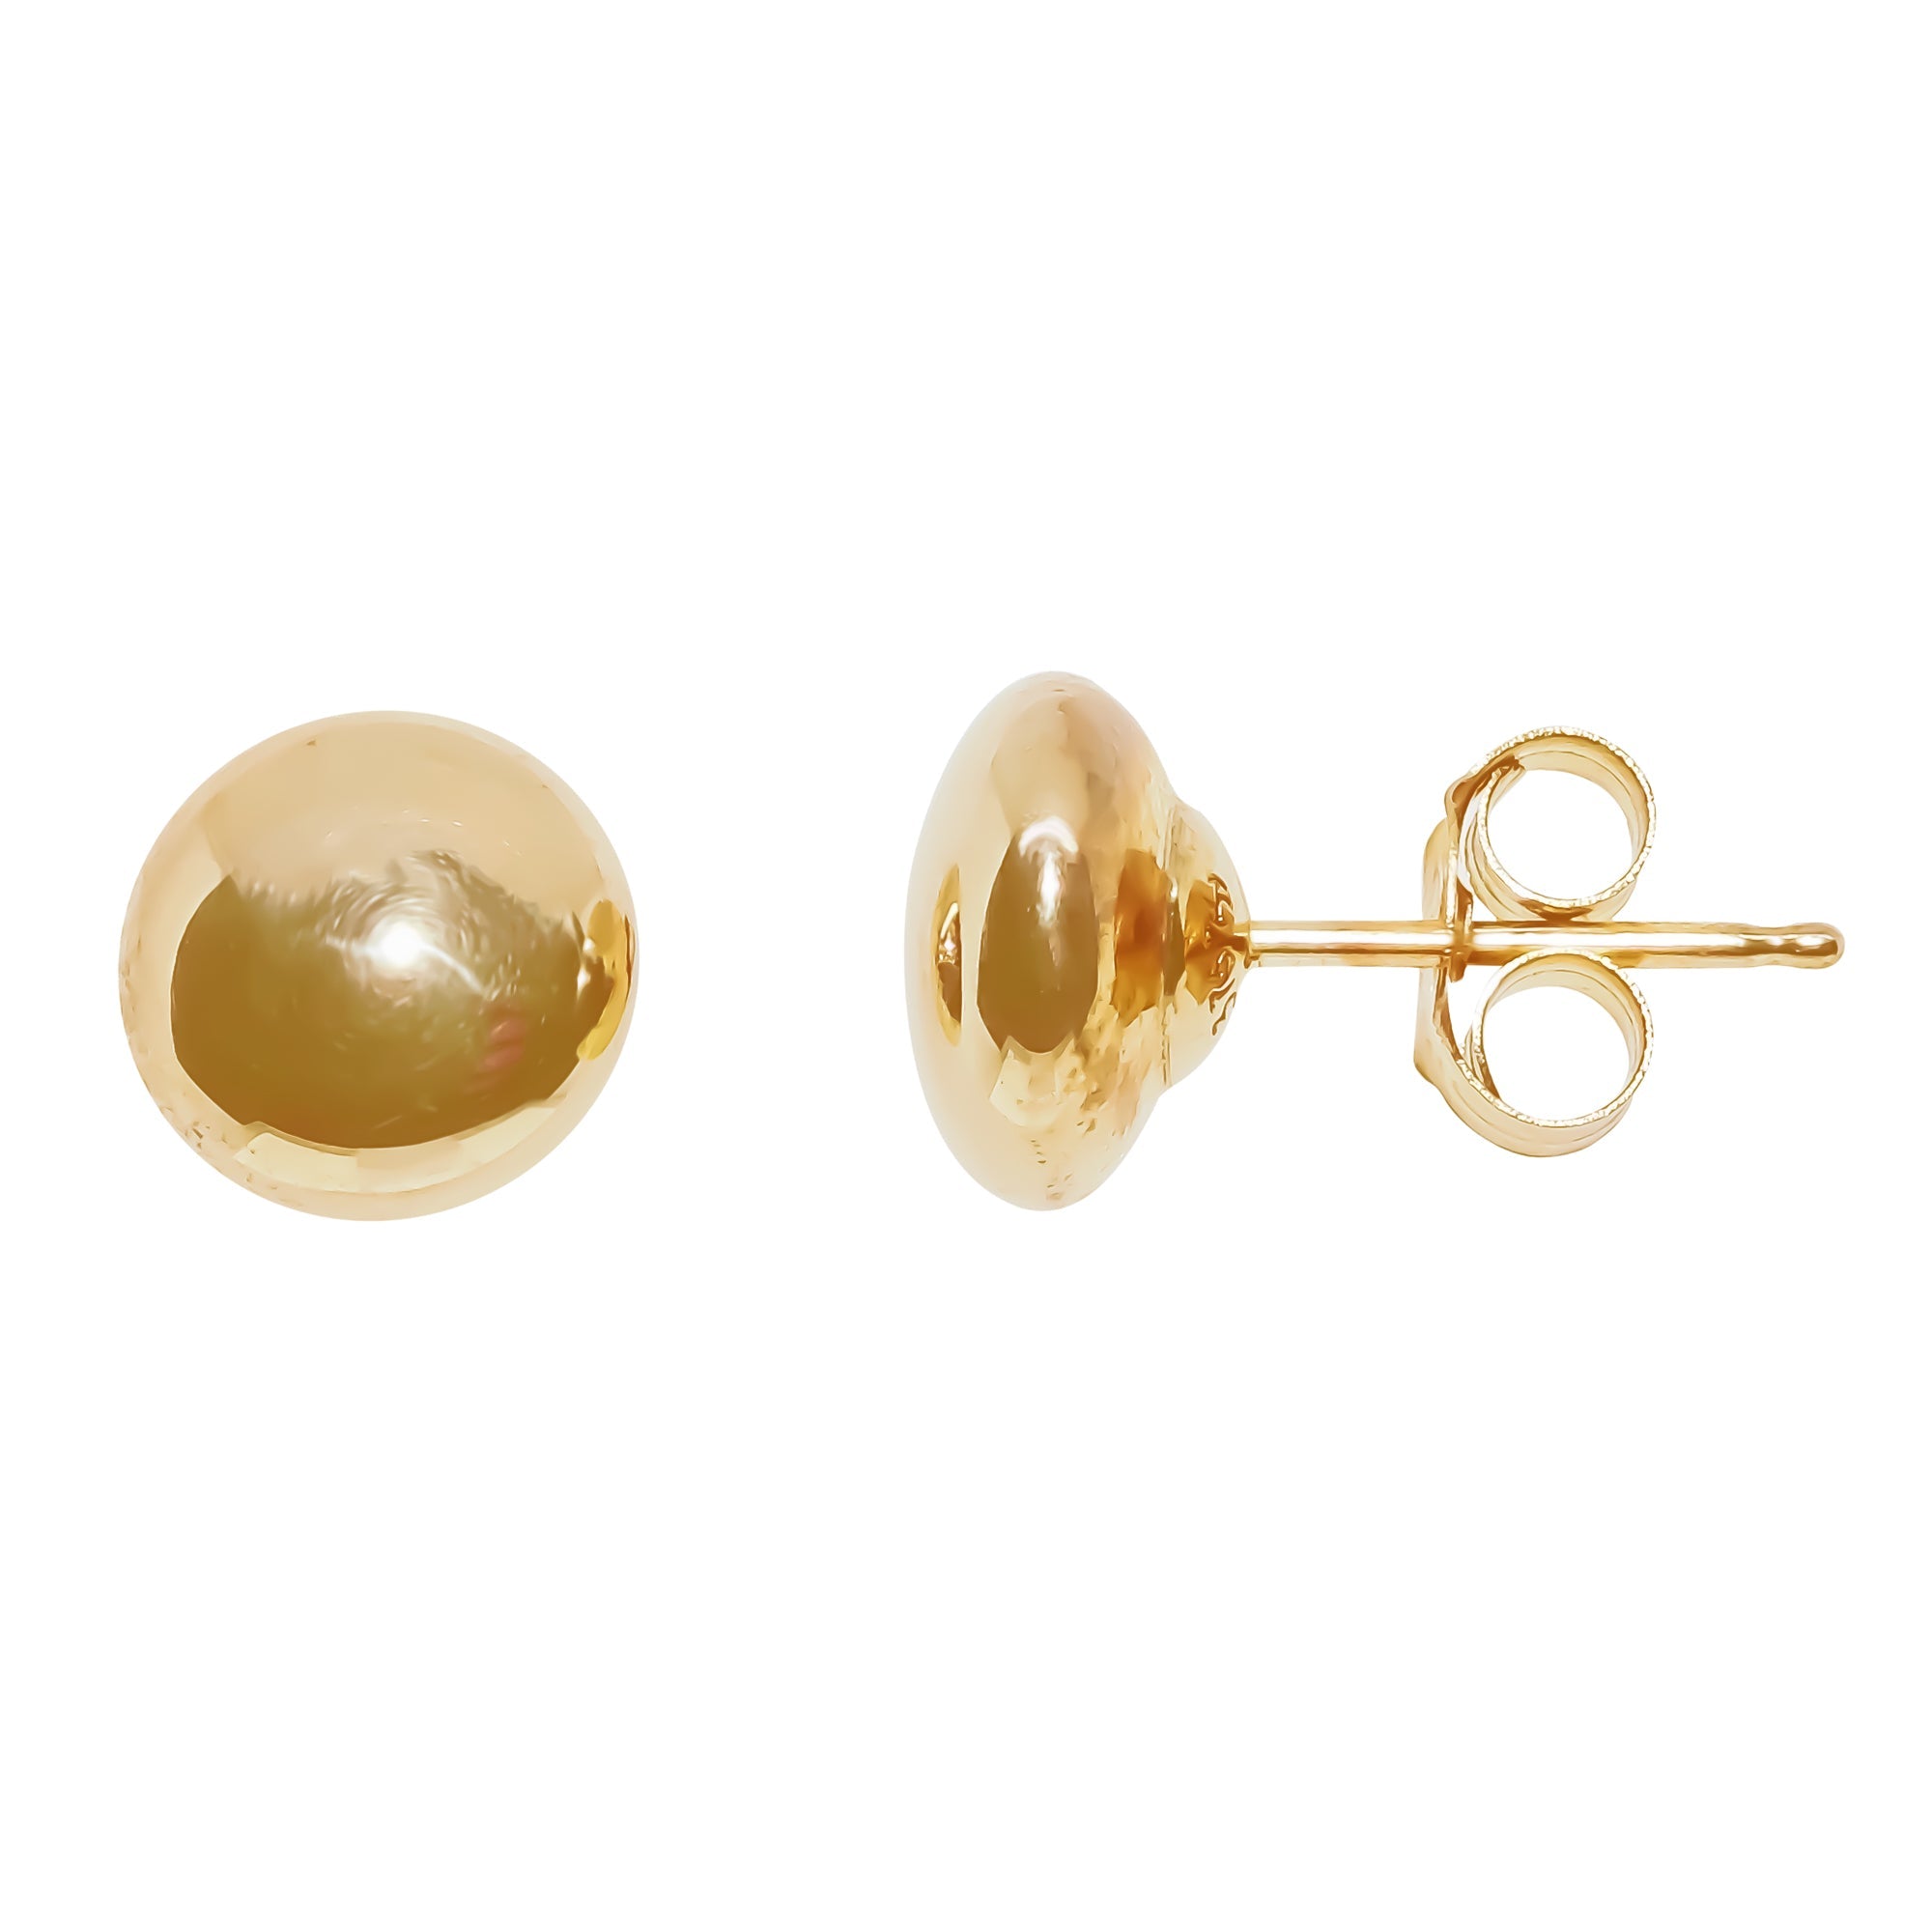 9ct gold 6mm button stud earrings